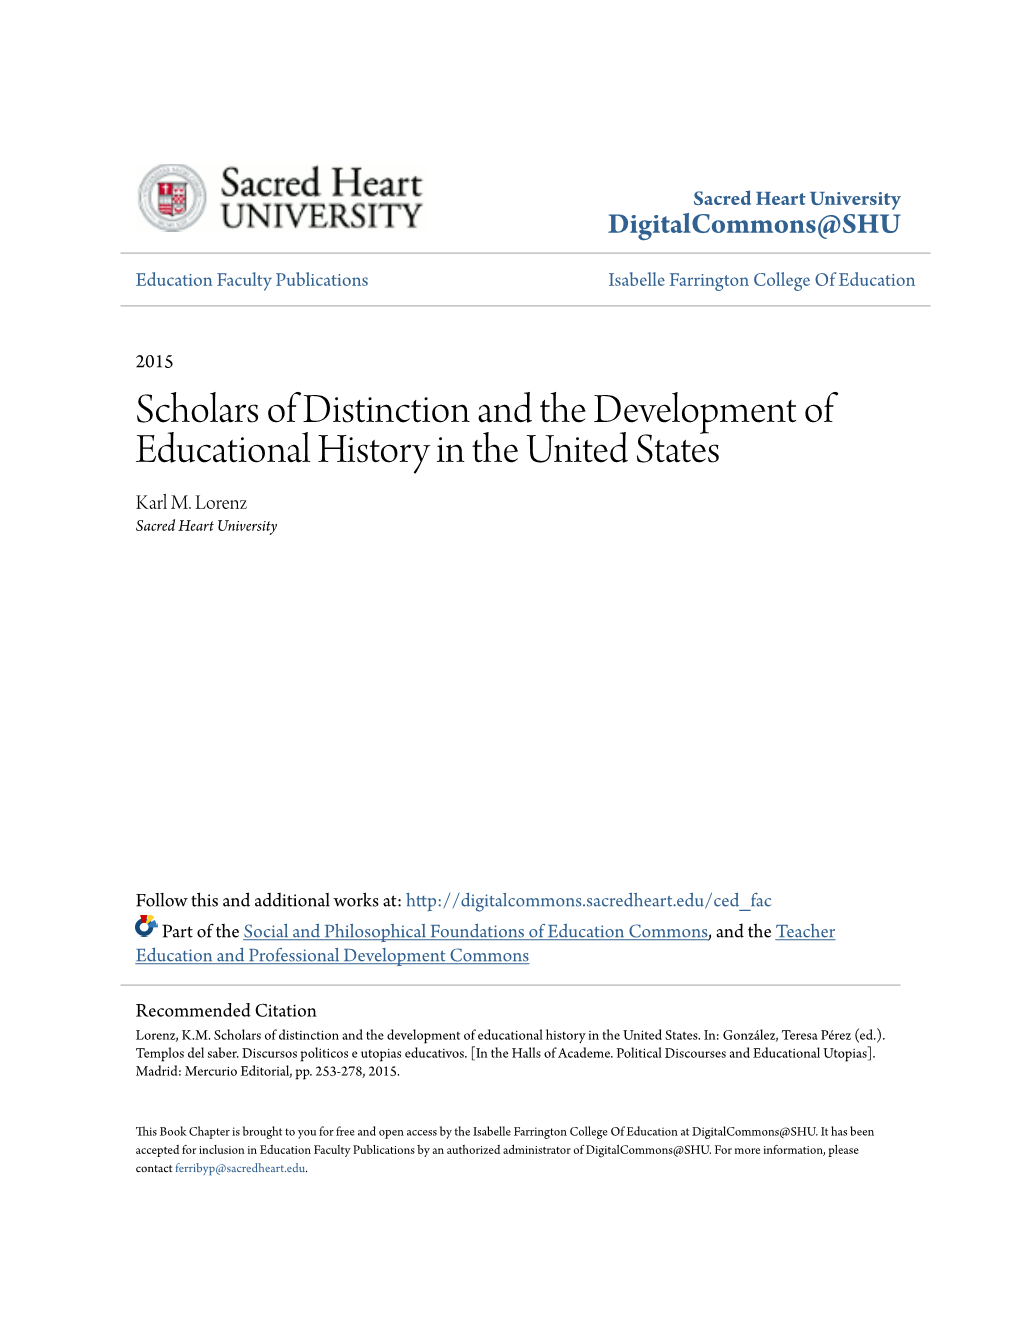 Scholars of Distinction and the Development of Educational History in the United States Karl M